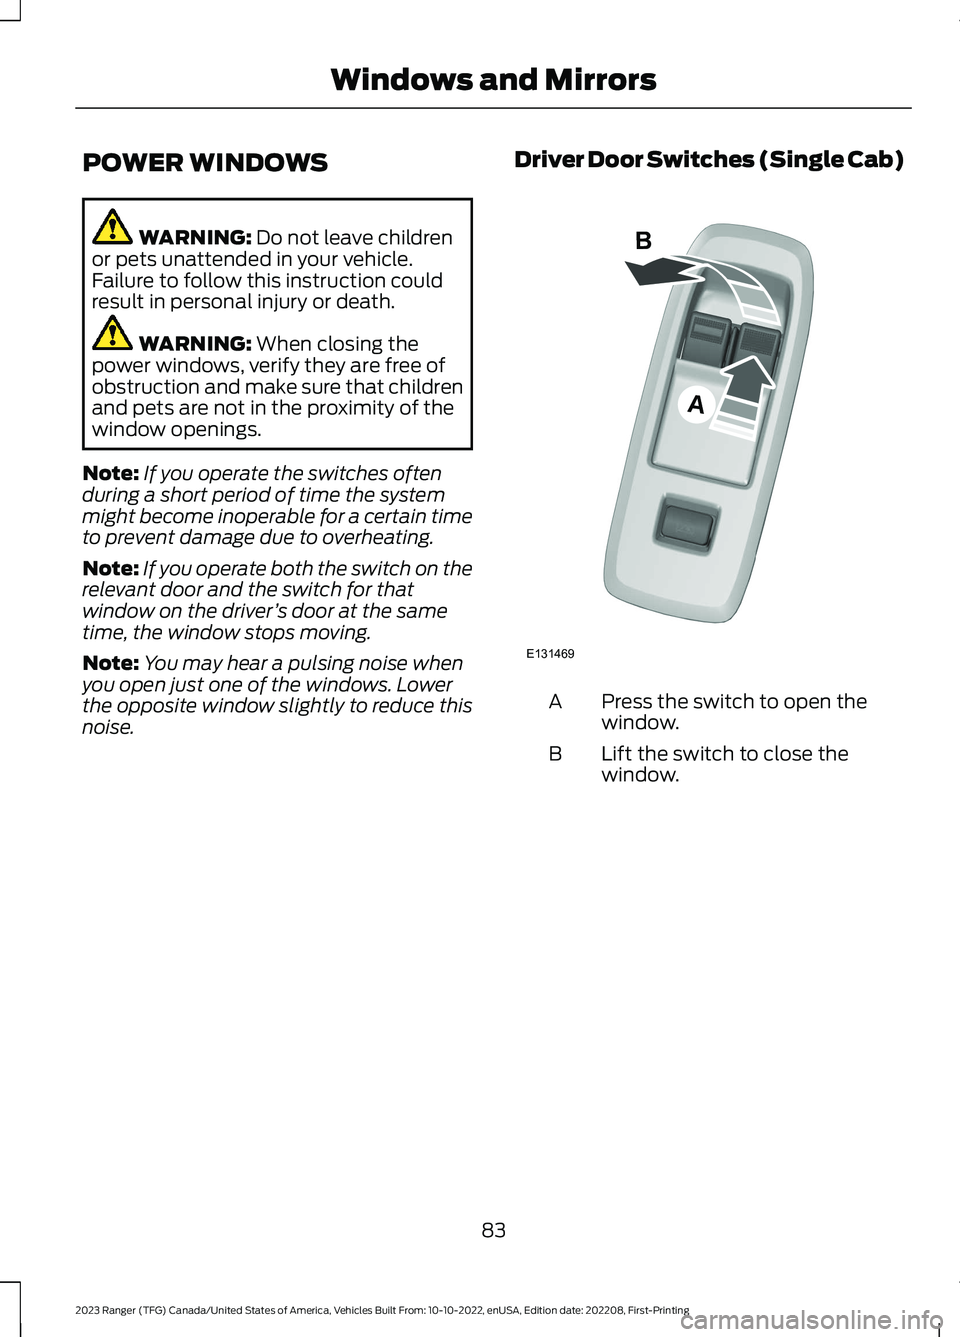 FORD RANGER 2023  Owners Manual POWER WINDOWS
WARNING: Do not leave childrenor pets unattended in your vehicle.Failure to follow this instruction couldresult in personal injury or death.
WARNING: When closing thepower windows, verif